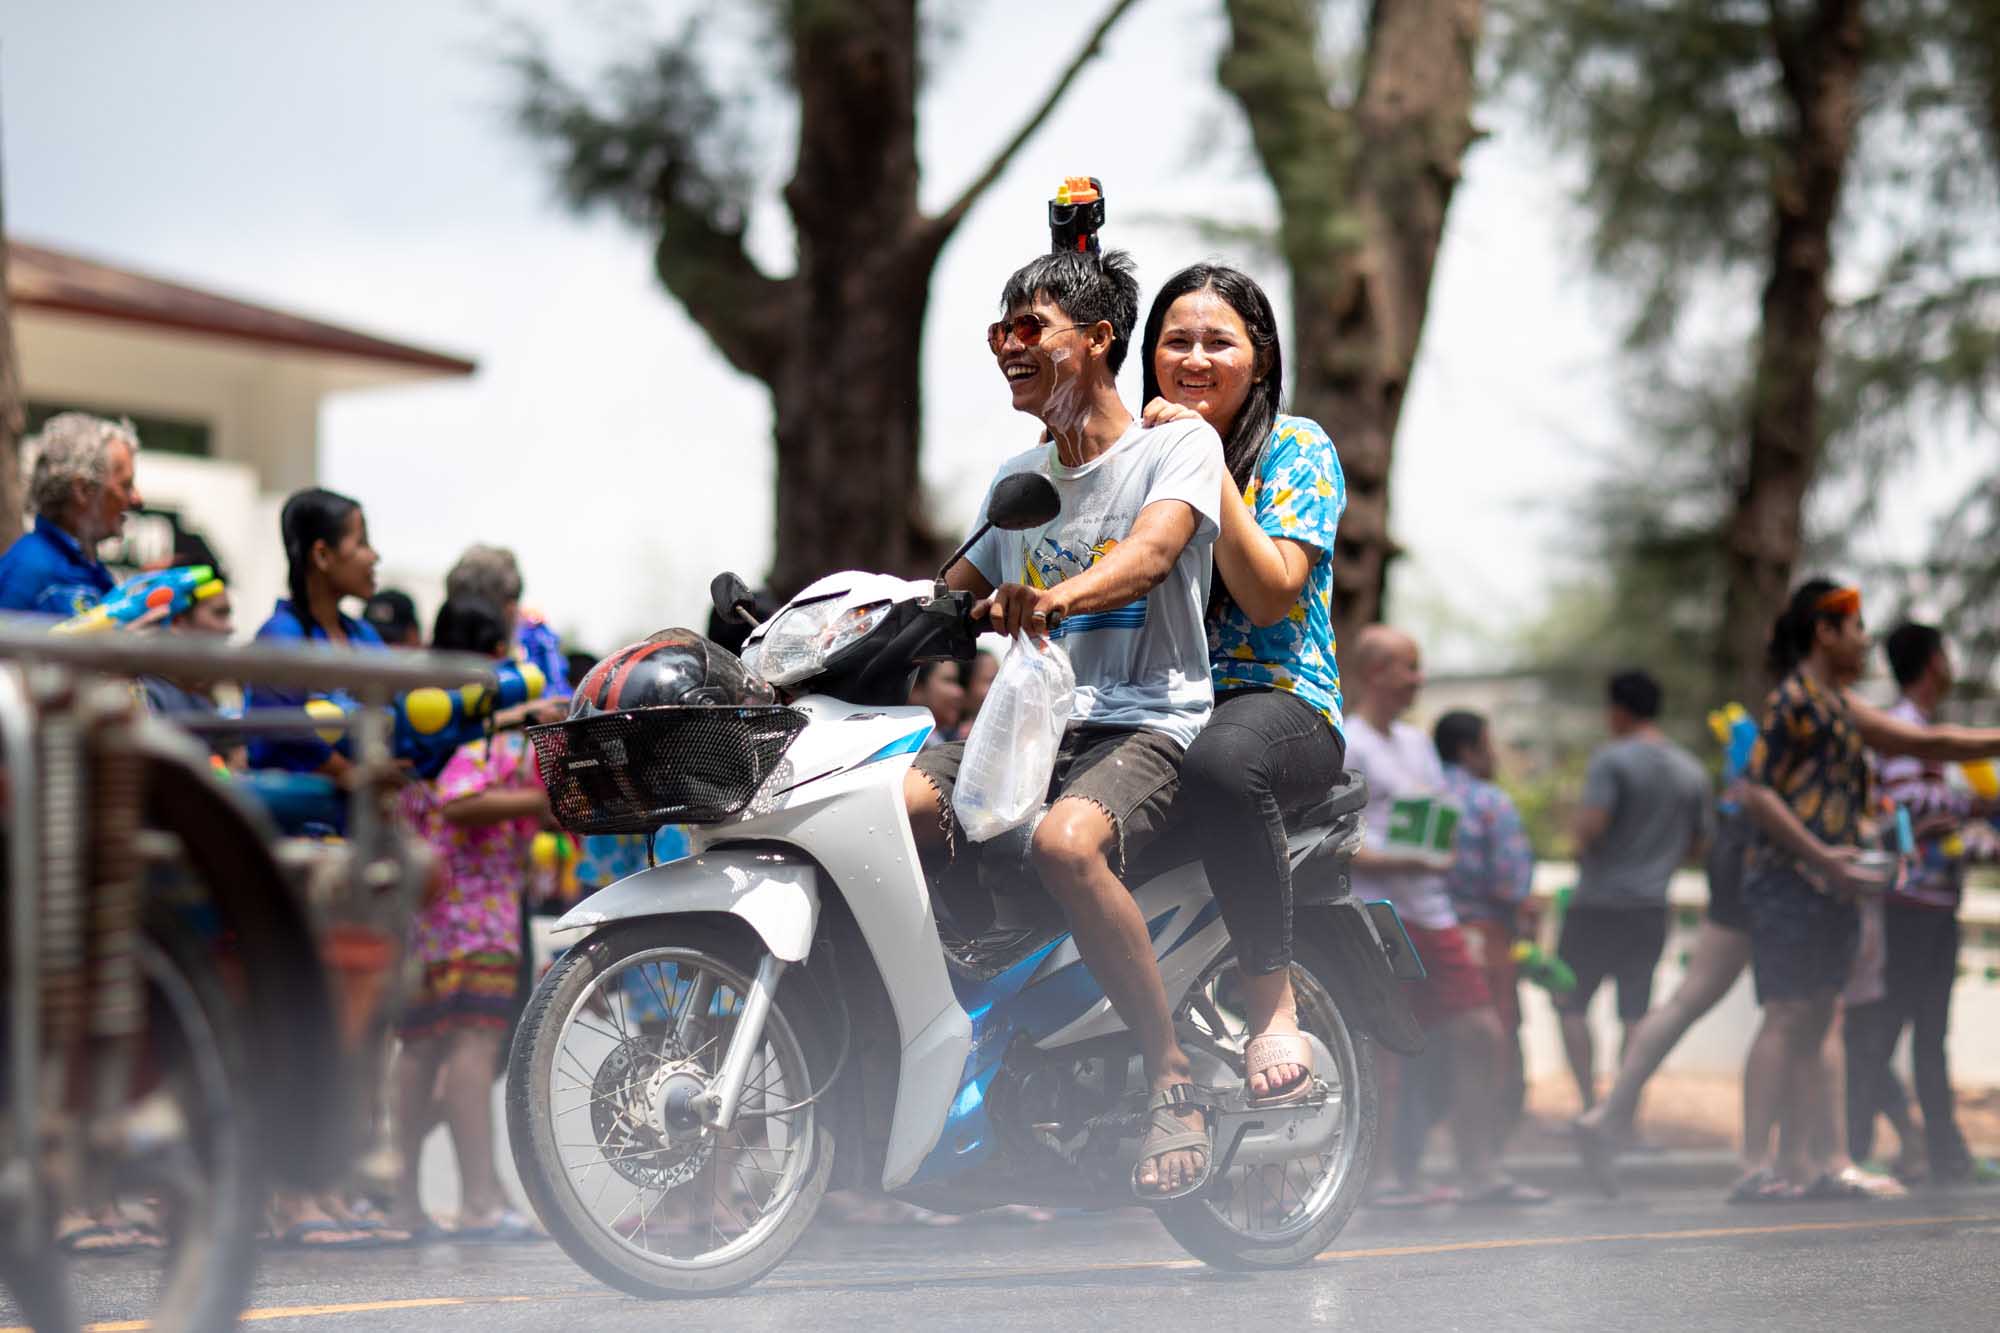 Smiling man and woman on motorbike at Songkran water festival in Phuket, Thailand